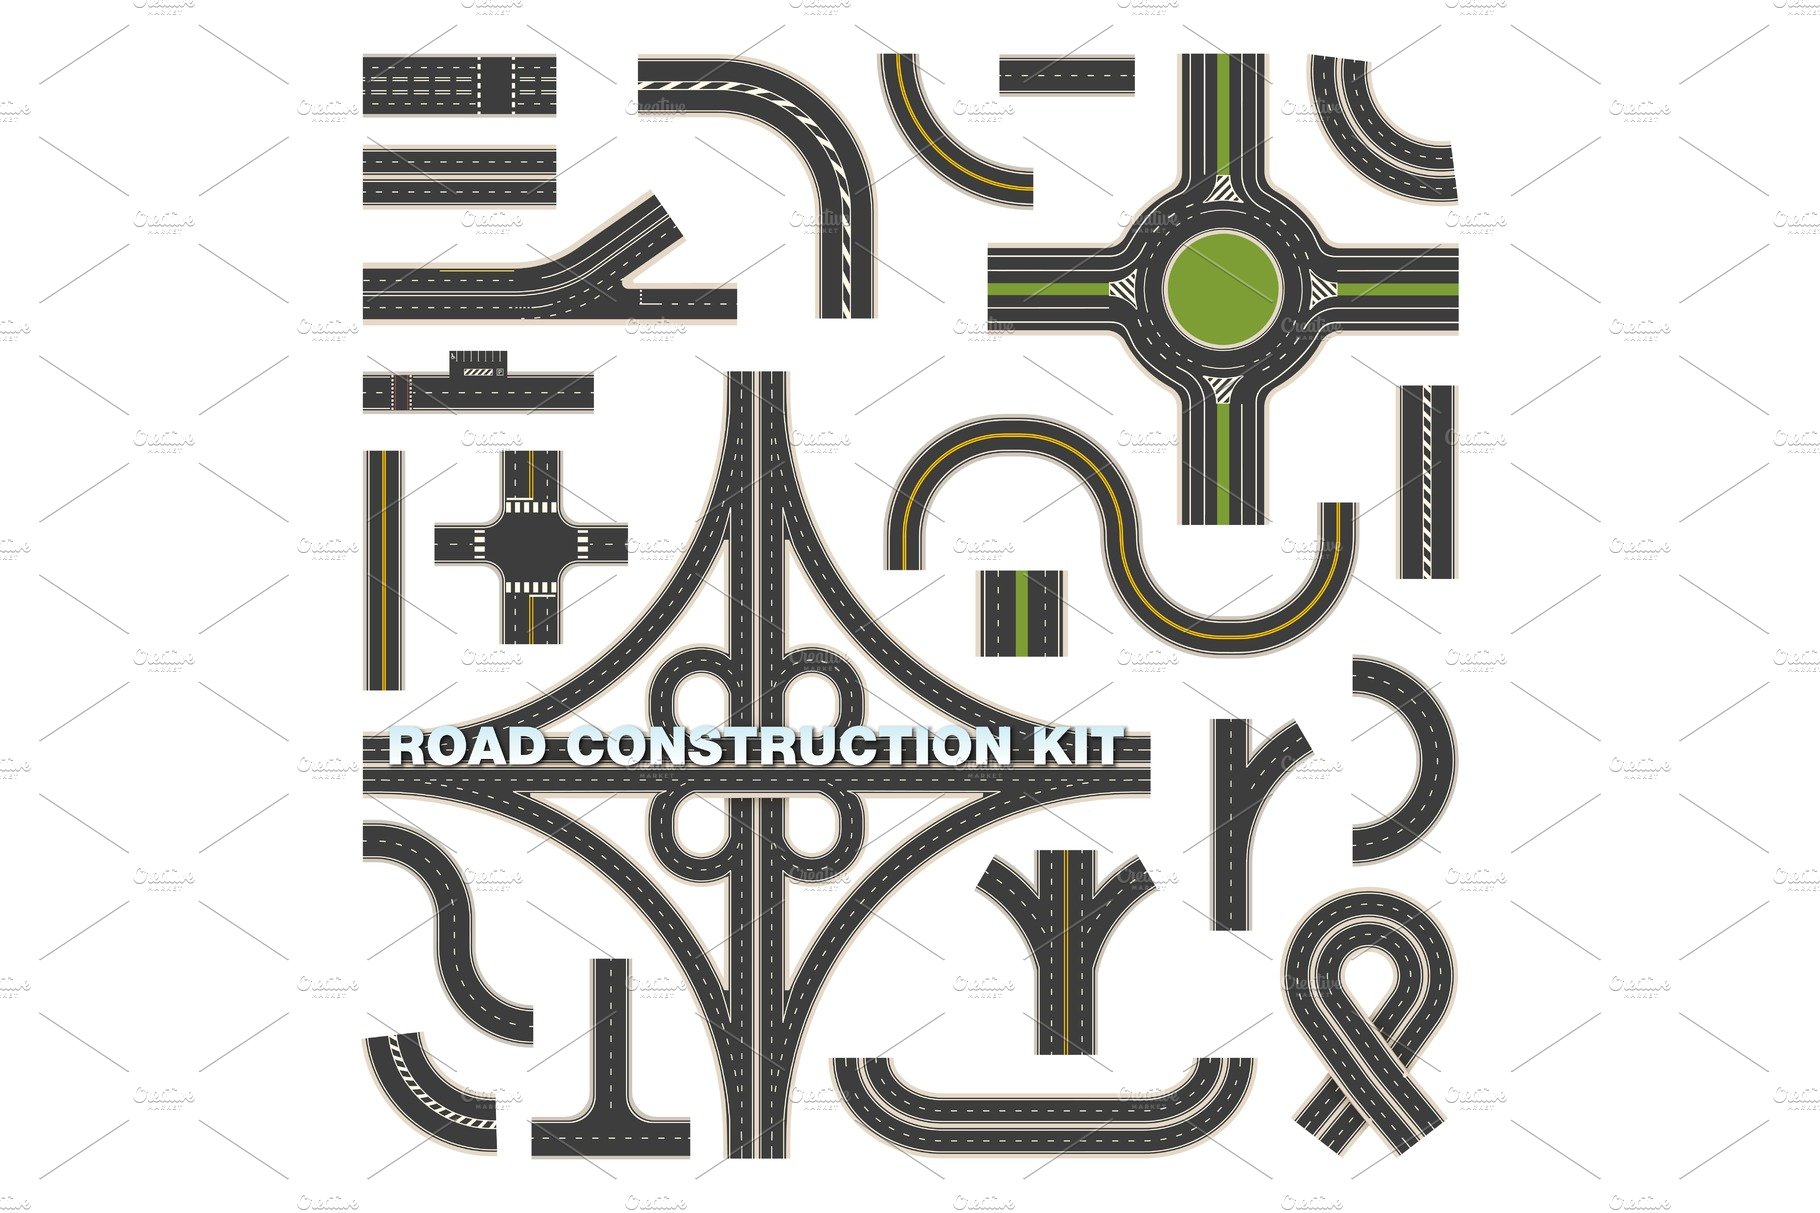 Top view on road parts for construction kit cover image.